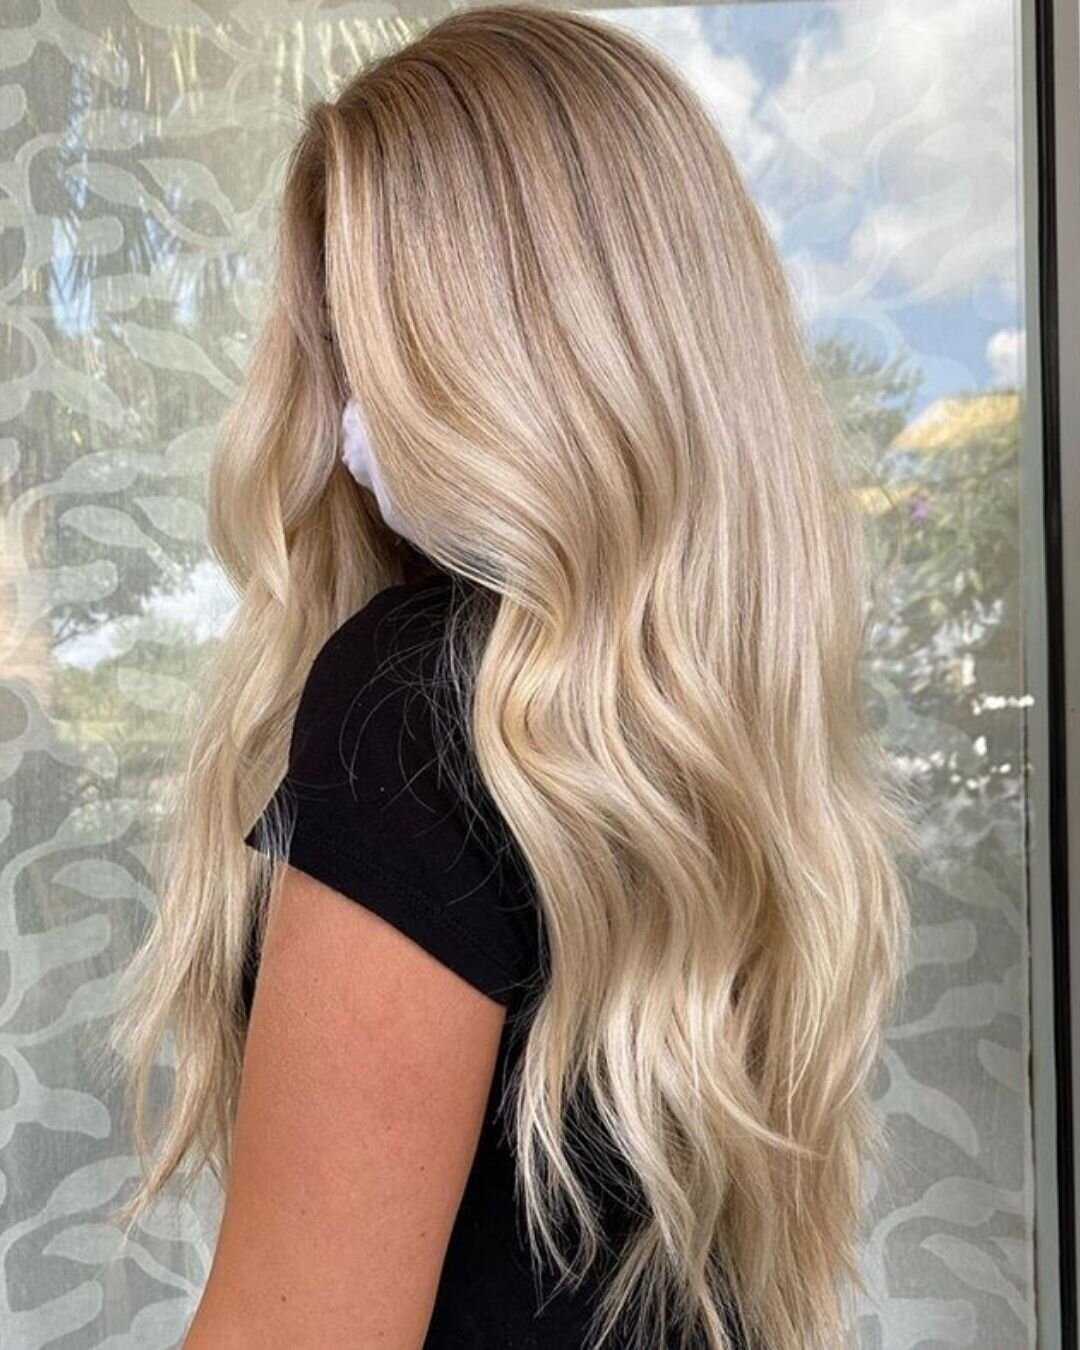 What's something new you would like to do with your hair this year? 💛

We're loving this bright blonde inspiration by @beautyland on Pinterest ✨

#bright #blonde #hair #hairinspiration #haircolour #blondehair #long #blondegoals